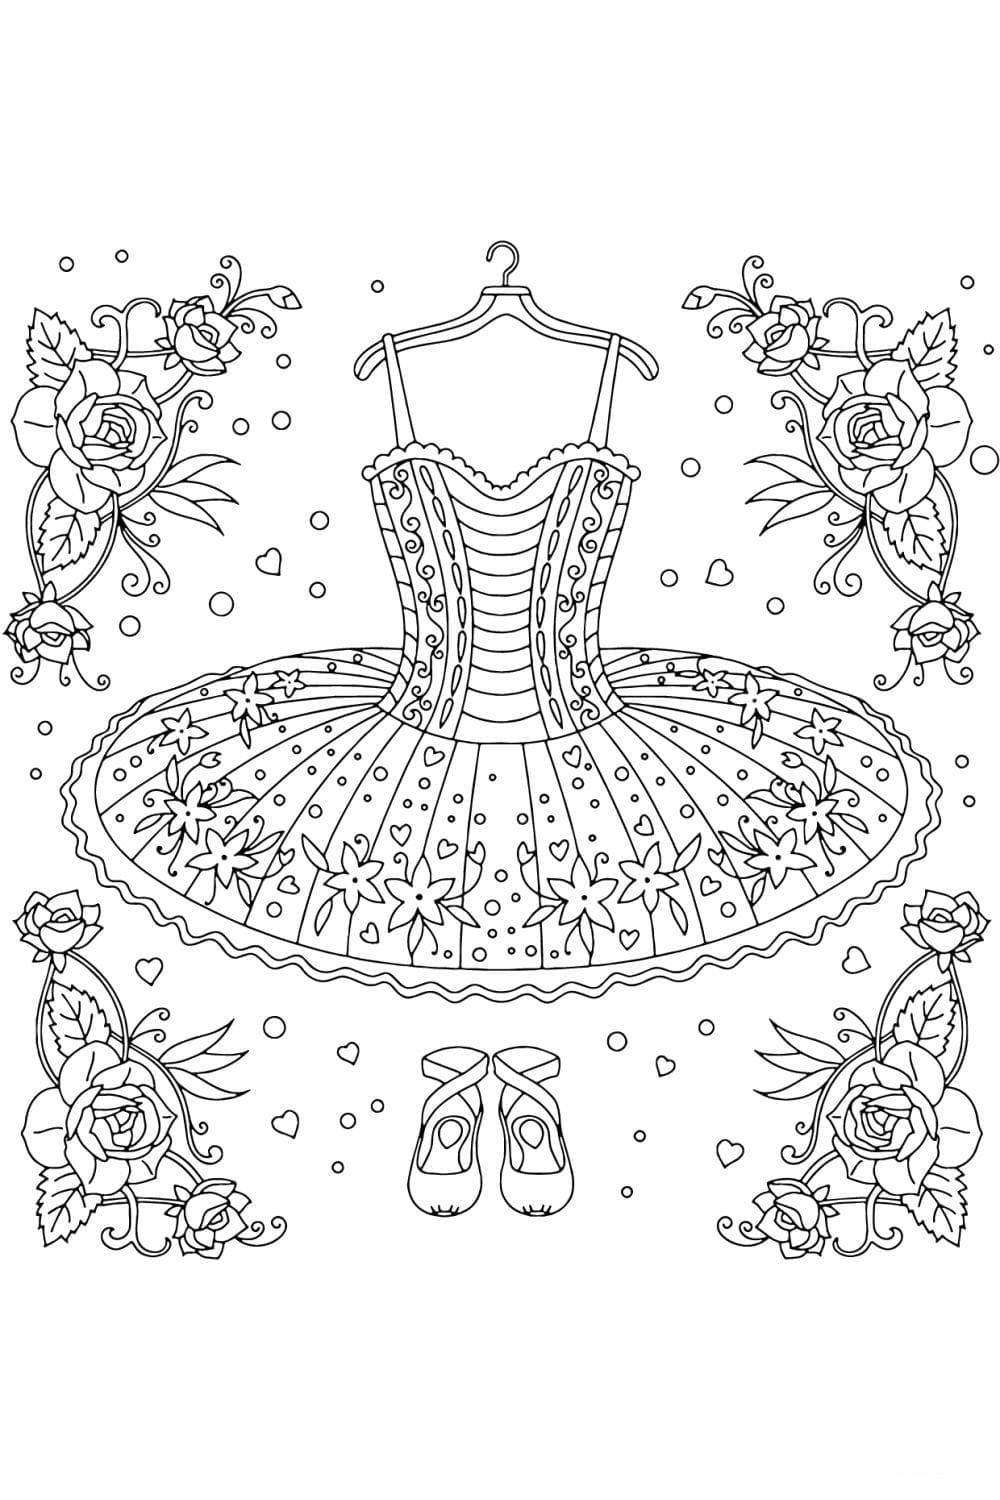 get dressed coloring page